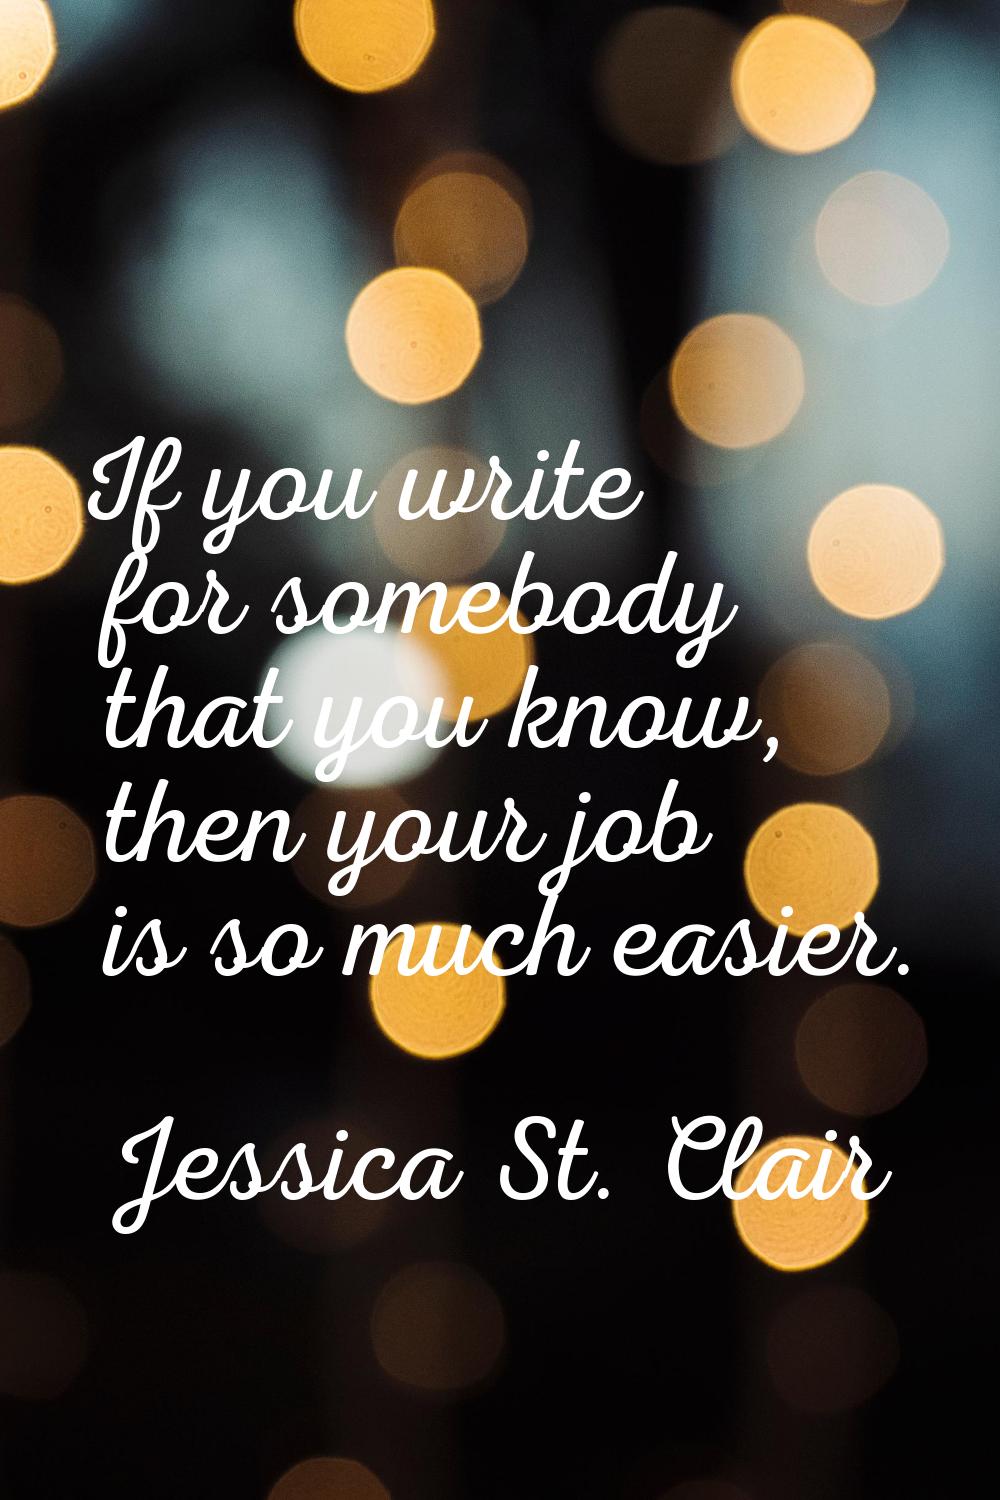 If you write for somebody that you know, then your job is so much easier.